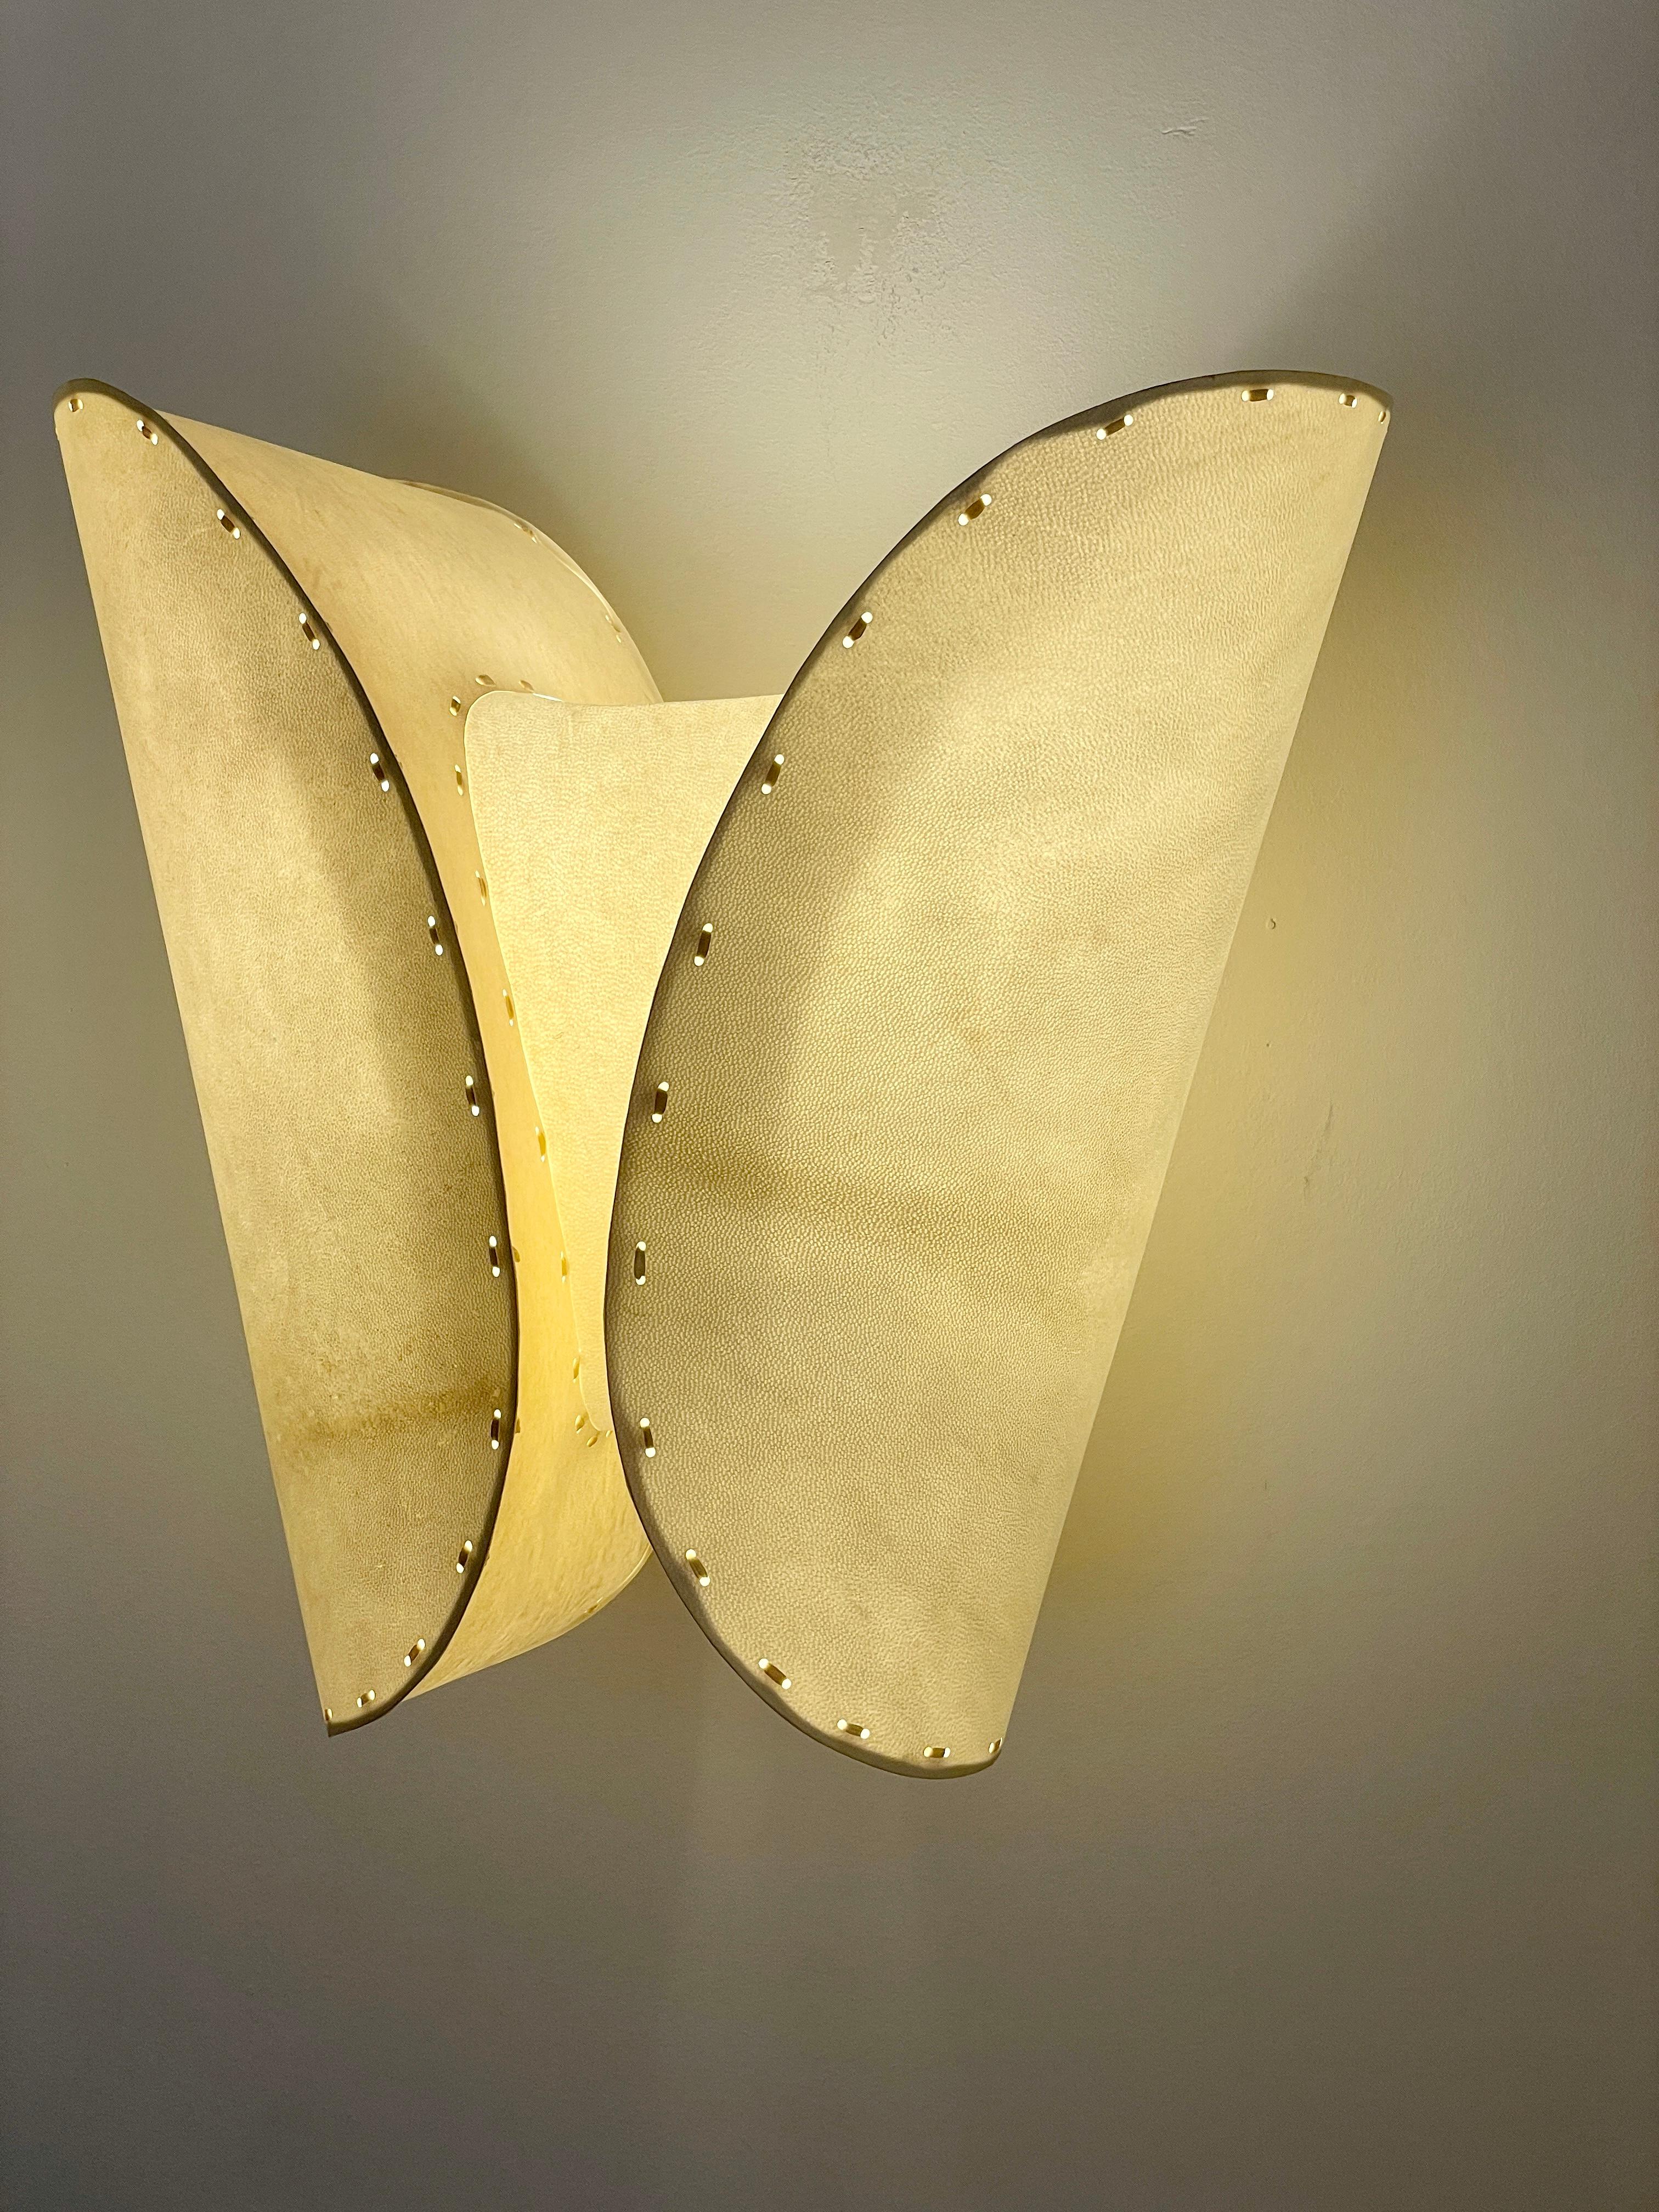 Goatskin Mauro Fabbro “Gstaad” Wall Lamps Sconce  Alexandre Biaggi  Botega Volta. Signed  For Sale